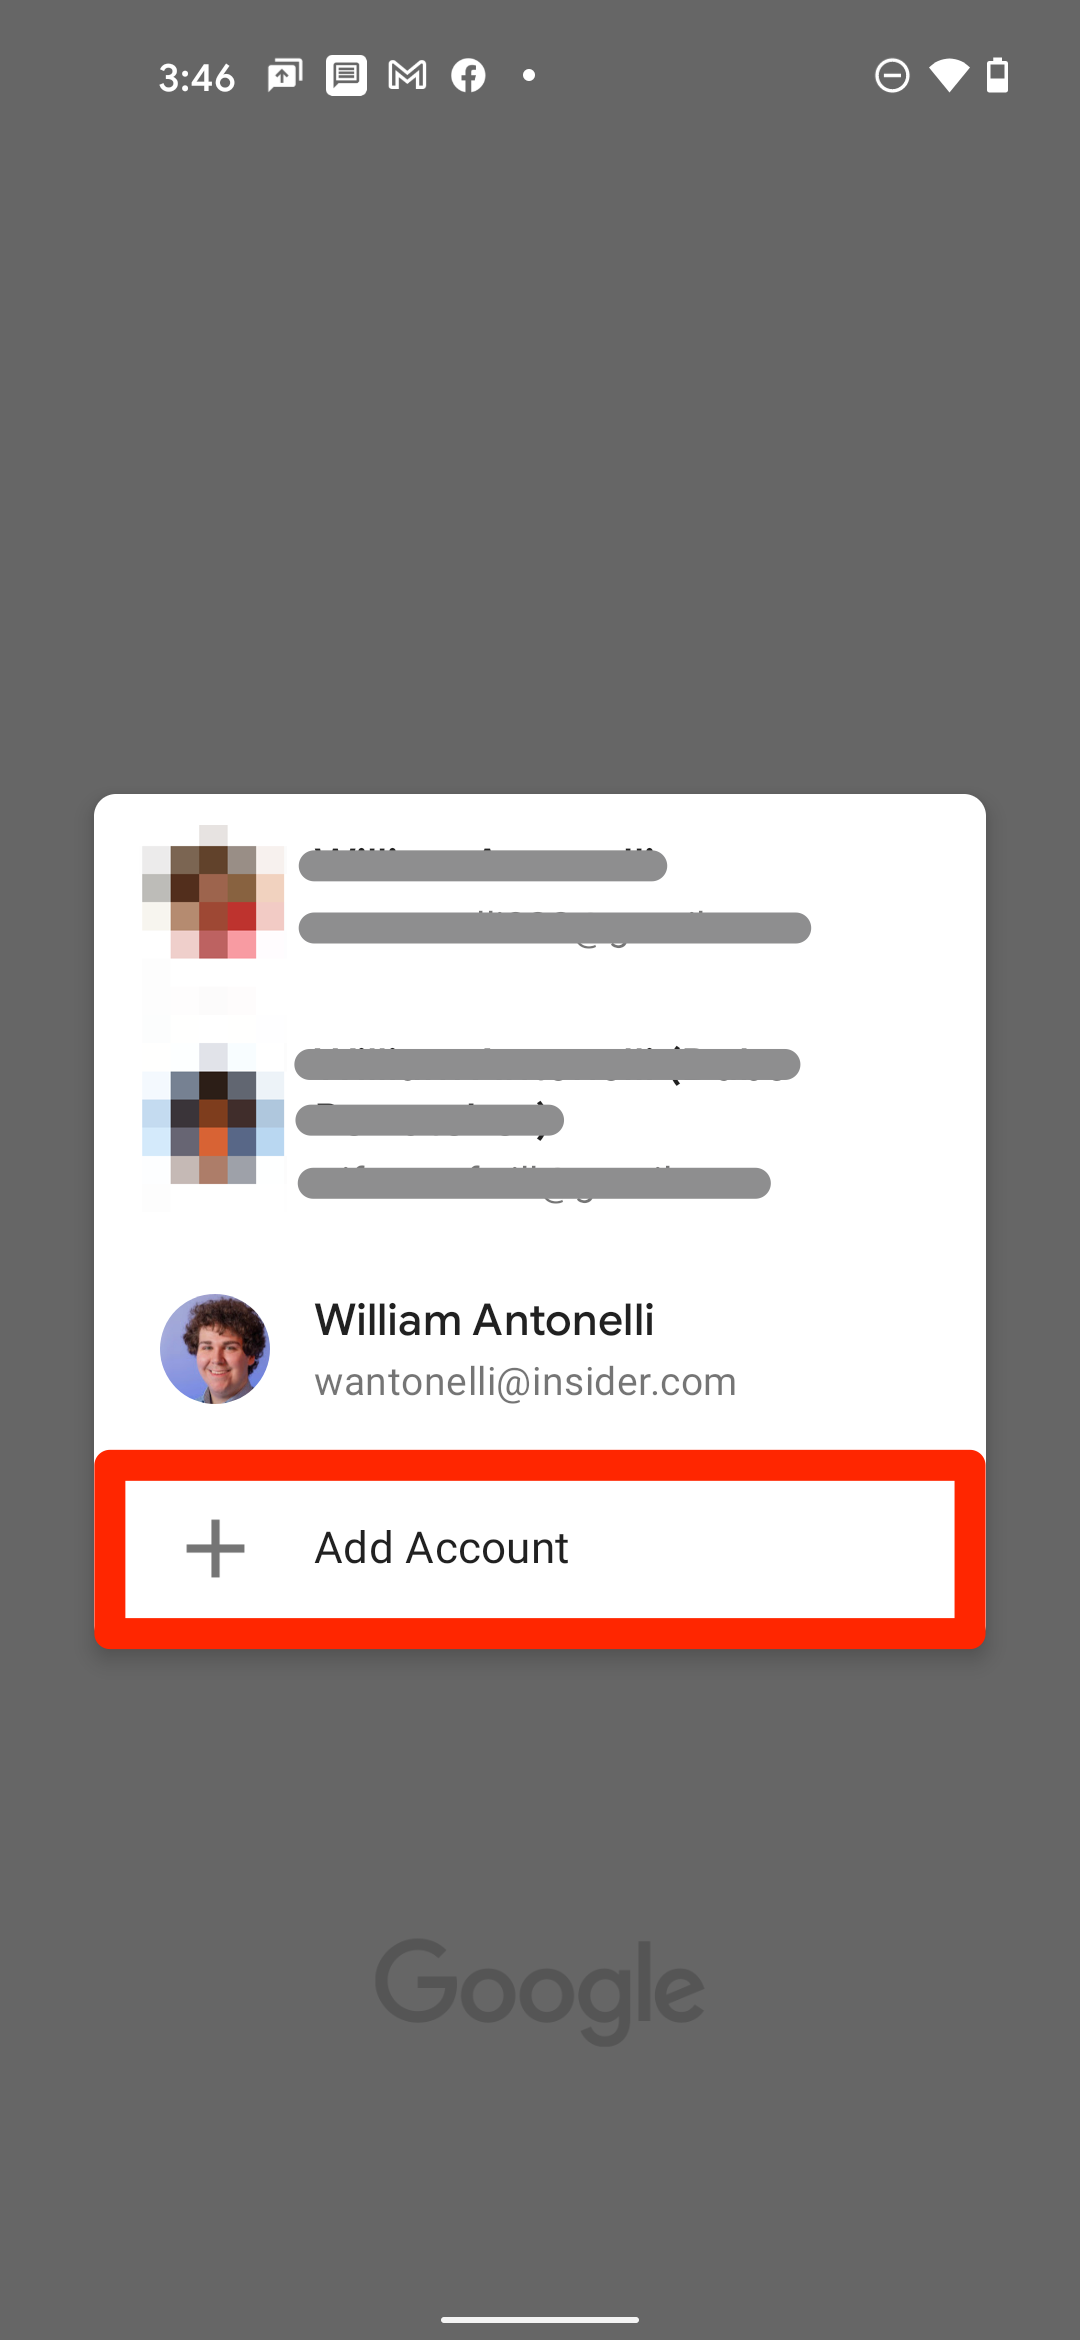 A list of Google accounts. The "Add Account" option is highlighted.